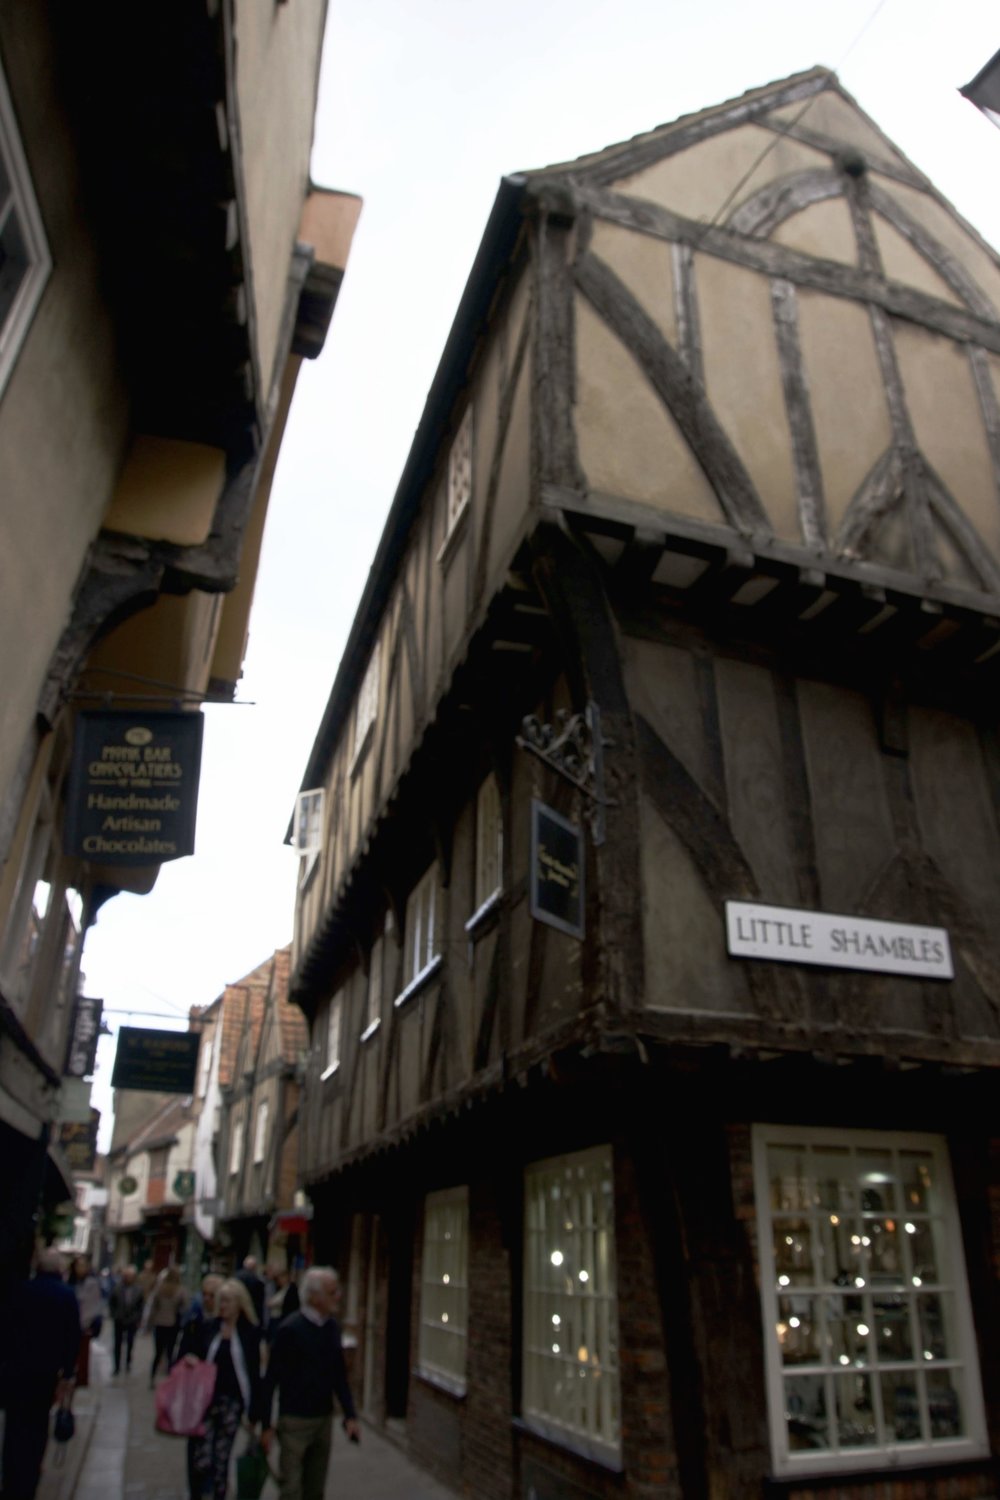 according to some, The Shambles inspired Diagon Alley